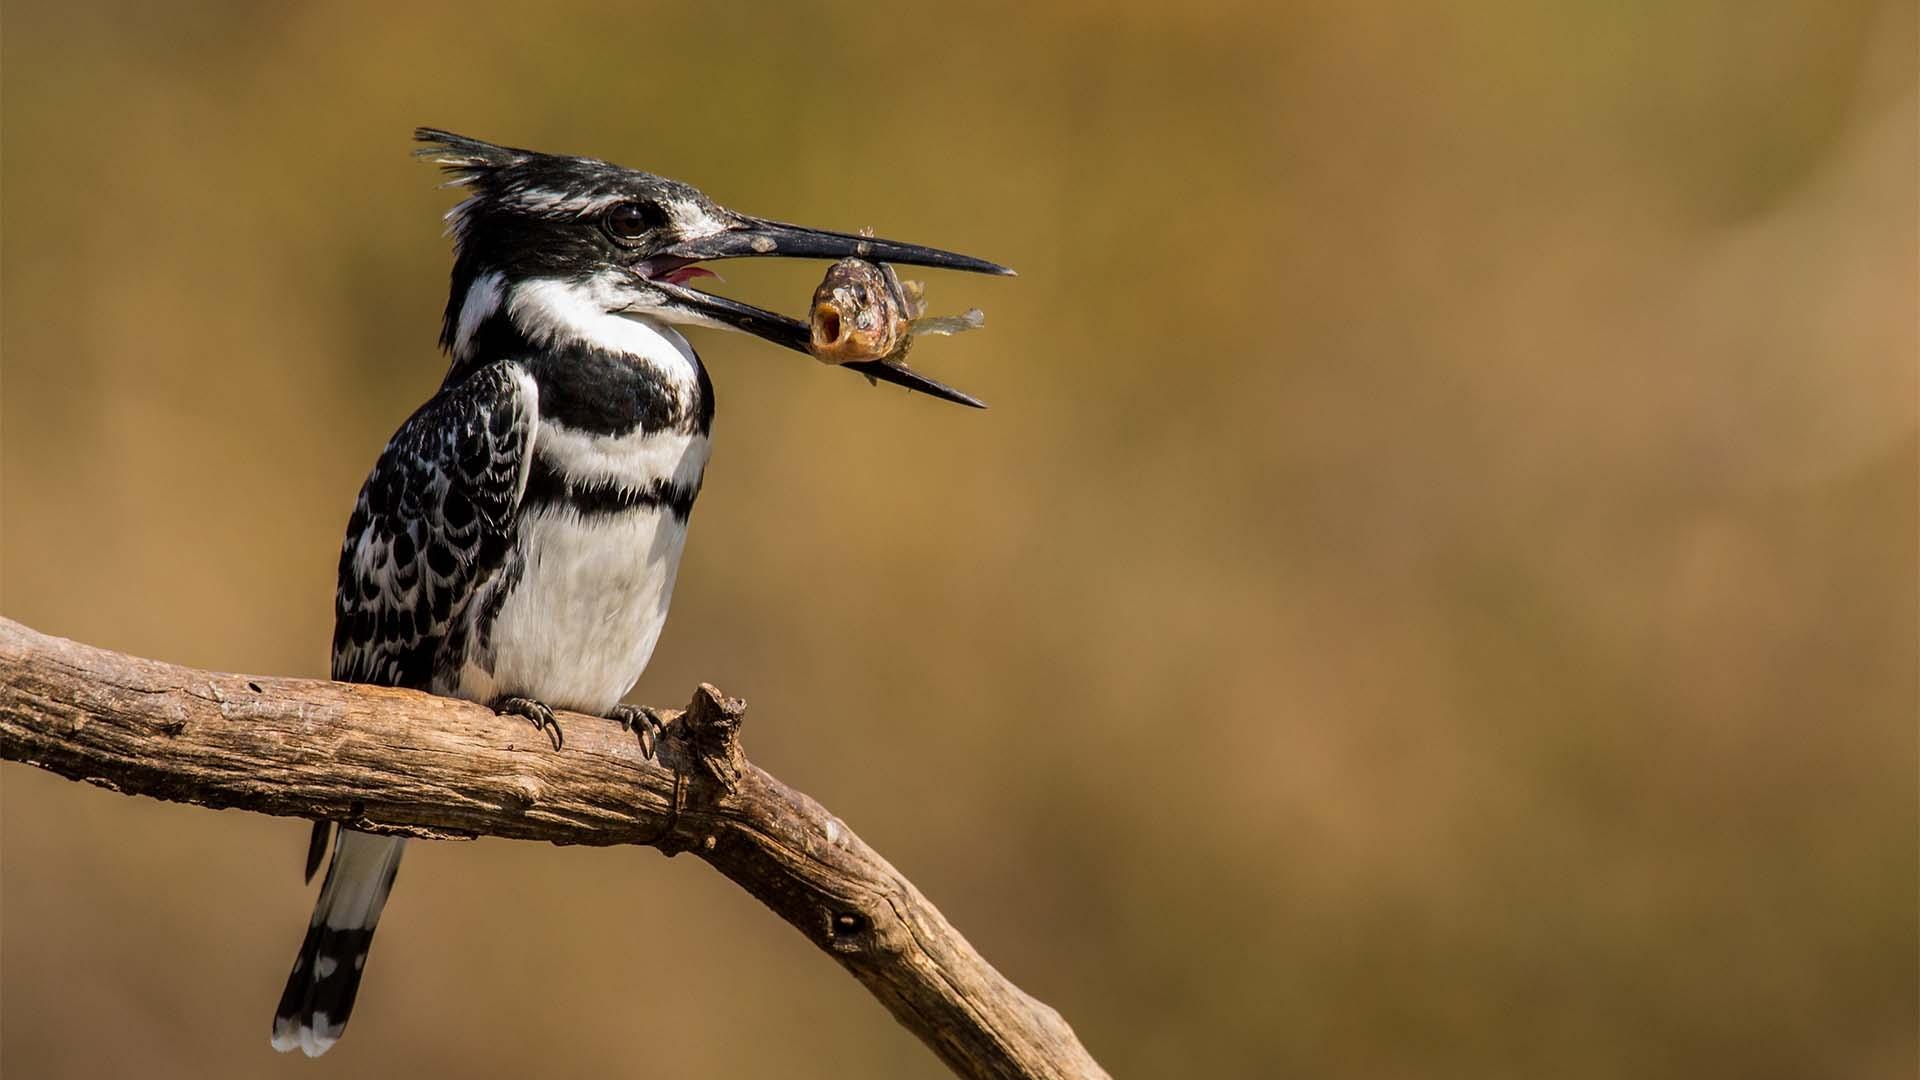 Pied Kingfisher catching a meal, Zambia.